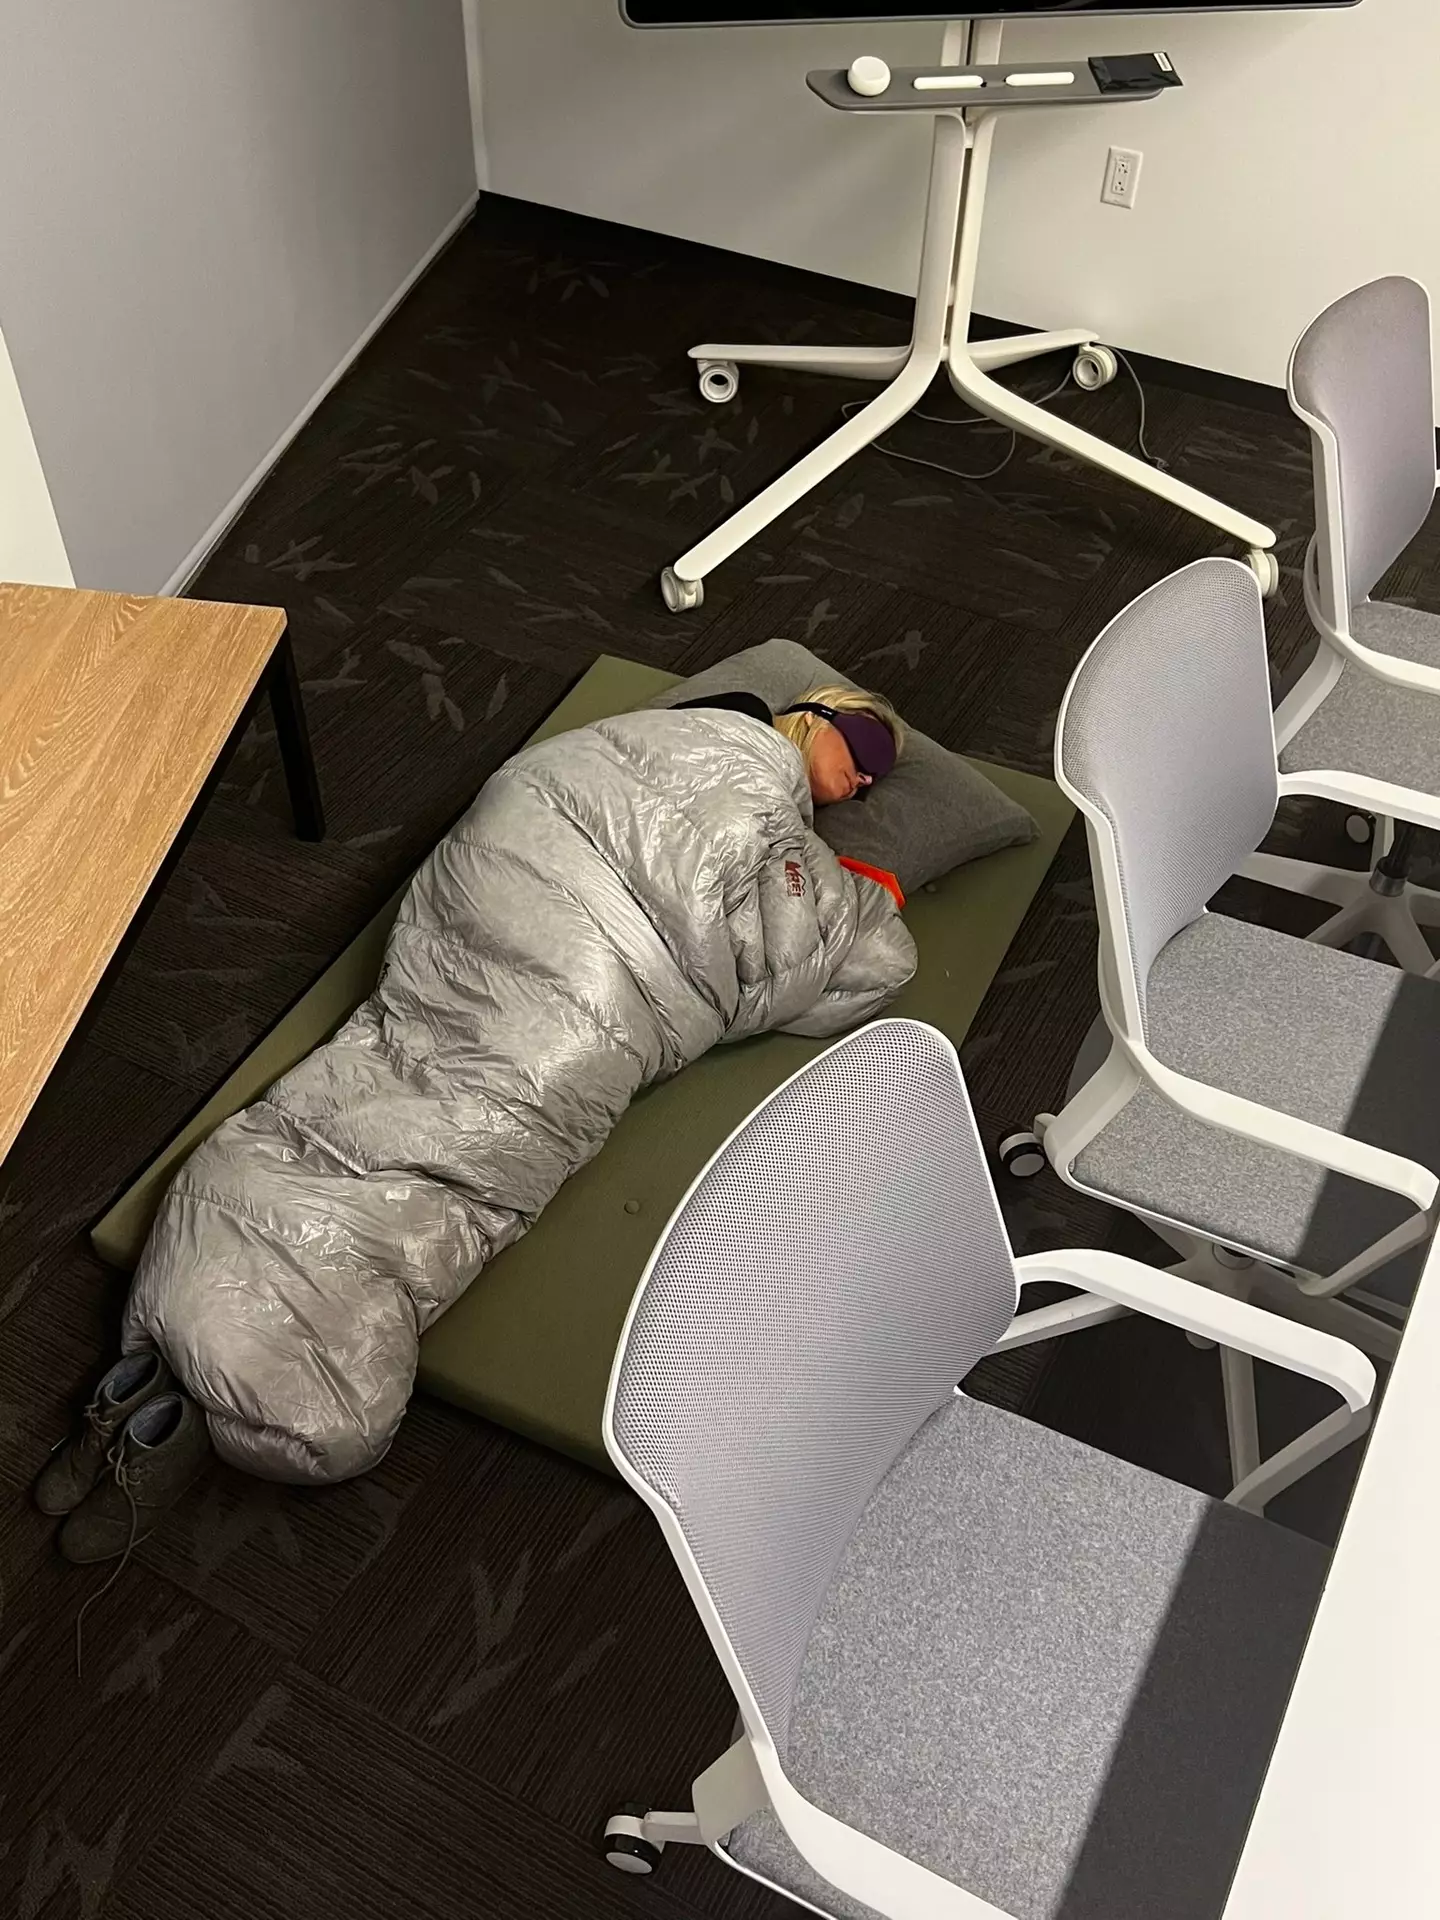 A photograph of a Twitter employee asleep on the office floor has gone viral.